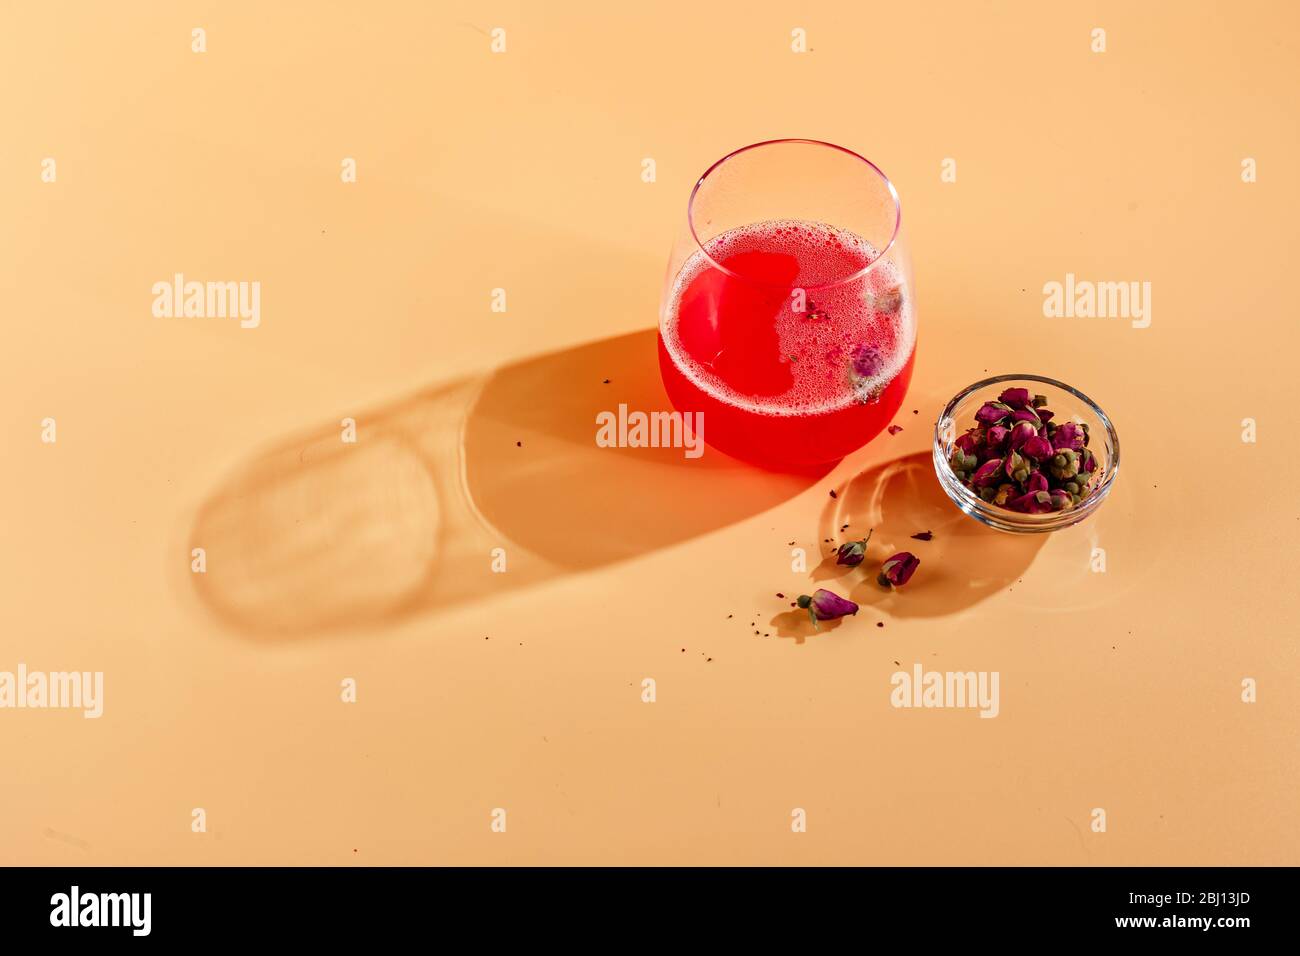 https://c8.alamy.com/comp/2BJ13JD/pink-alcoholic-cocktail-with-lemonade-champagne-or-martini-decorated-with-dry-rosebuds-on-colored-background-with-glare-in-the-background-2BJ13JD.jpg